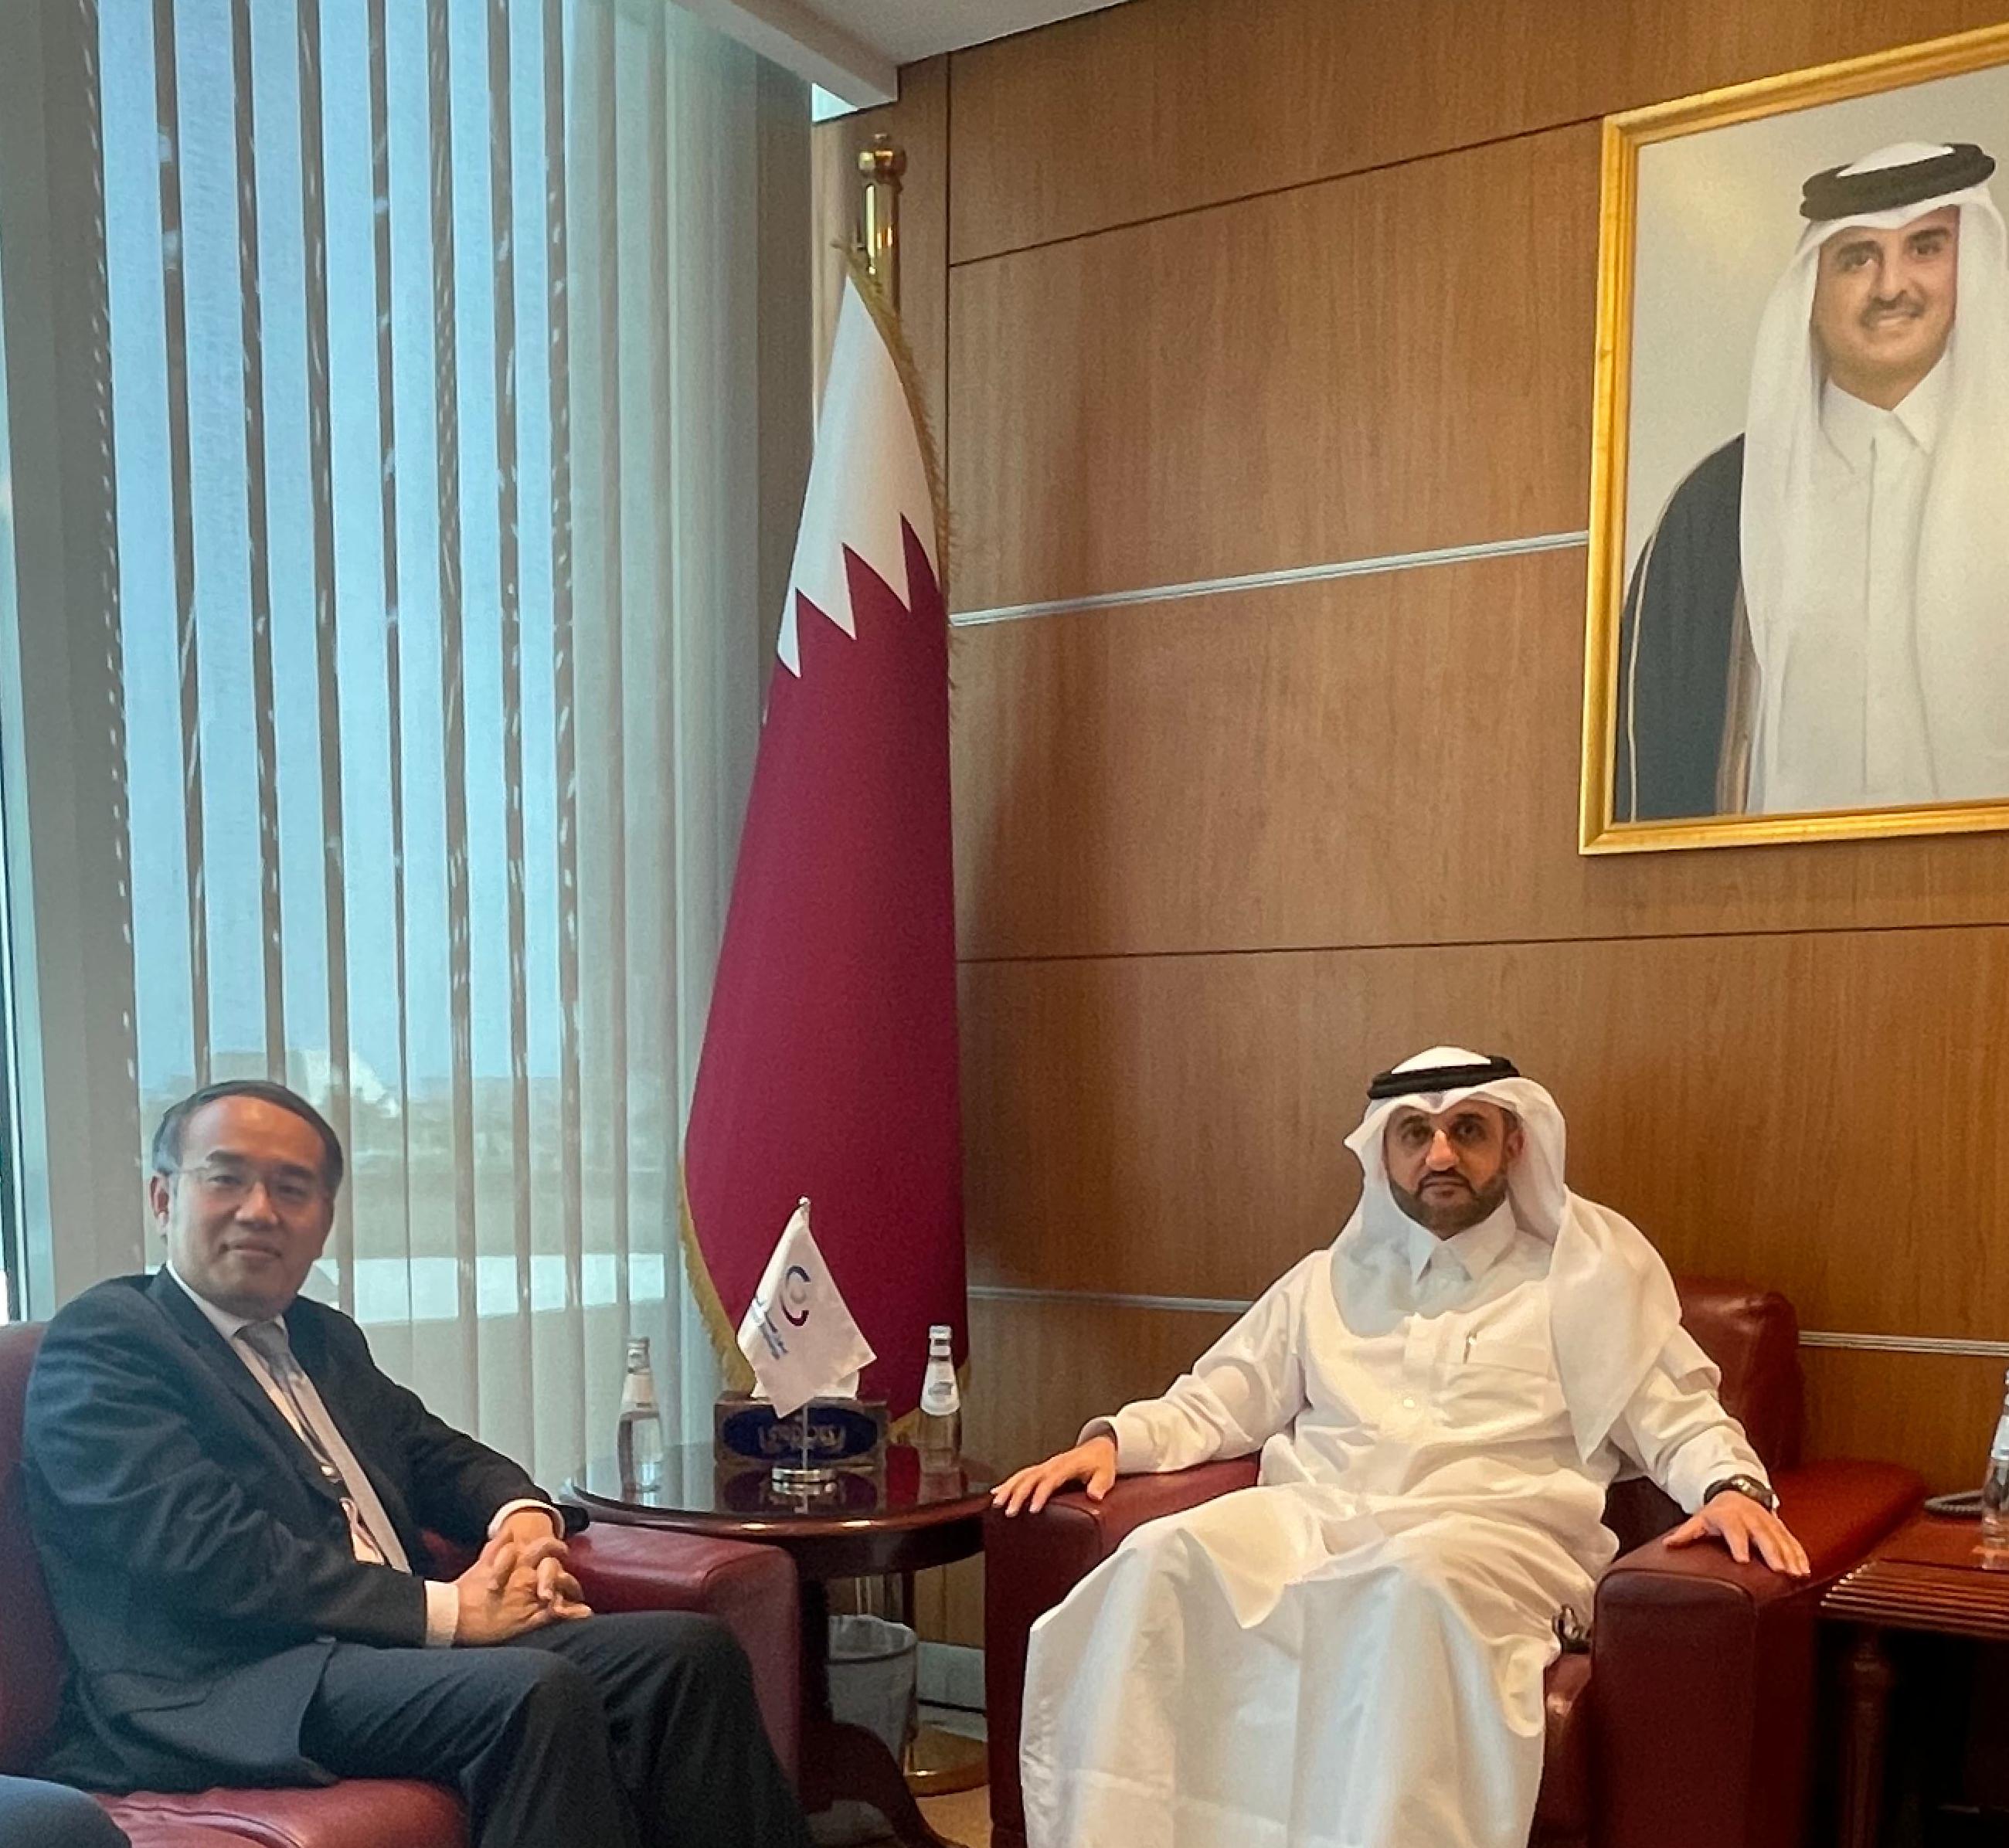 The Secretary for Financial Services and the Treasury, Mr Christopher Hui, continued his visit to Qatar. Photo shows Mr Hui (left) meeting with the Acting Chief Executive Officer of the Qatar Stock Exchange, Mr Abdulaziz Nasser Al-Emadi (right), in Doha today (September 21).